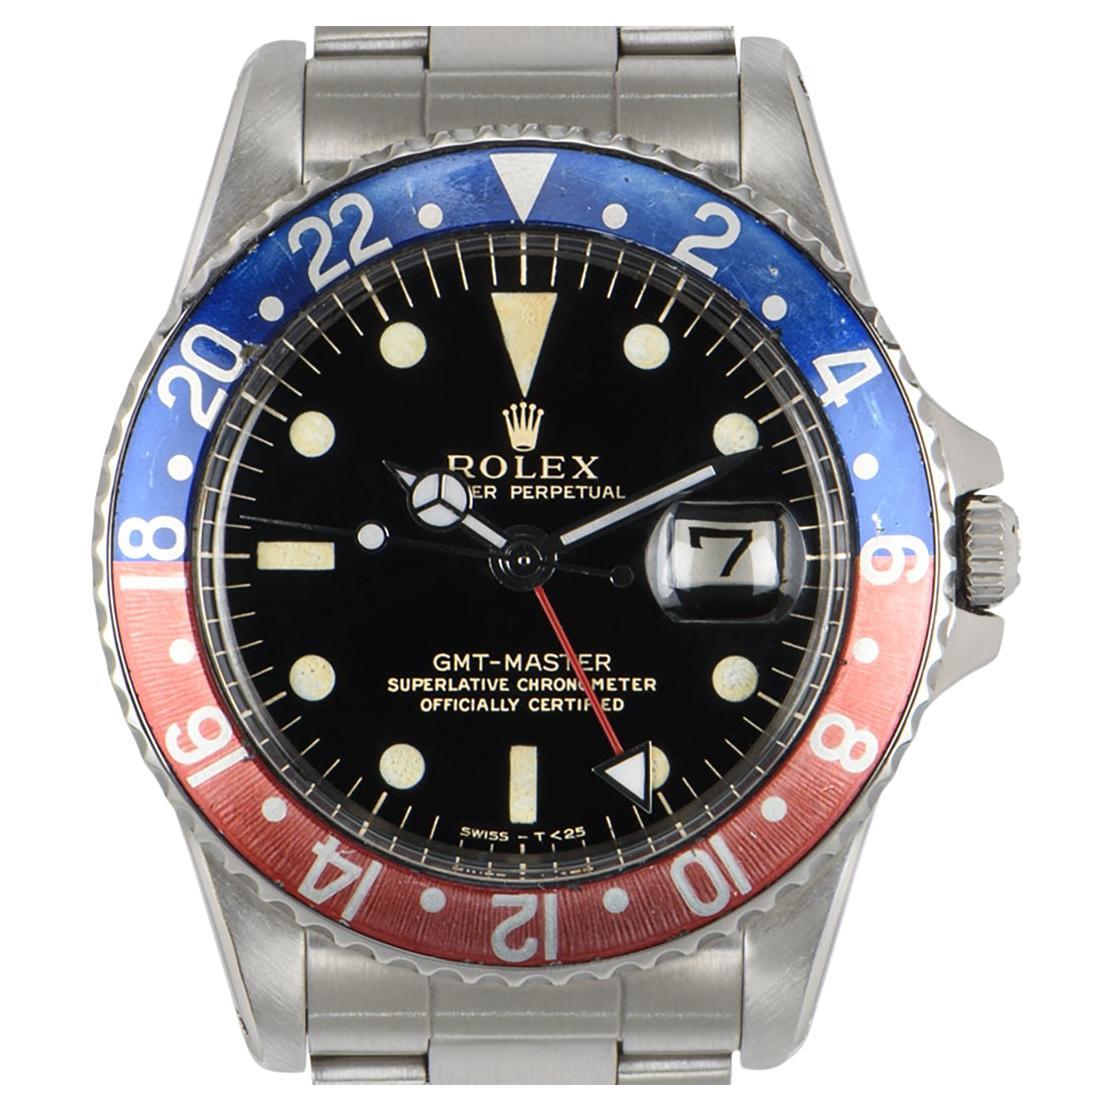 A Stainless Steel Oyster Perpetual GMT-Master Vintage Men's Wristwatch, black gilt dial with hour markers, date at 3 0'clock, a stainless steel bi-directional rotating bezel with a red and blue 